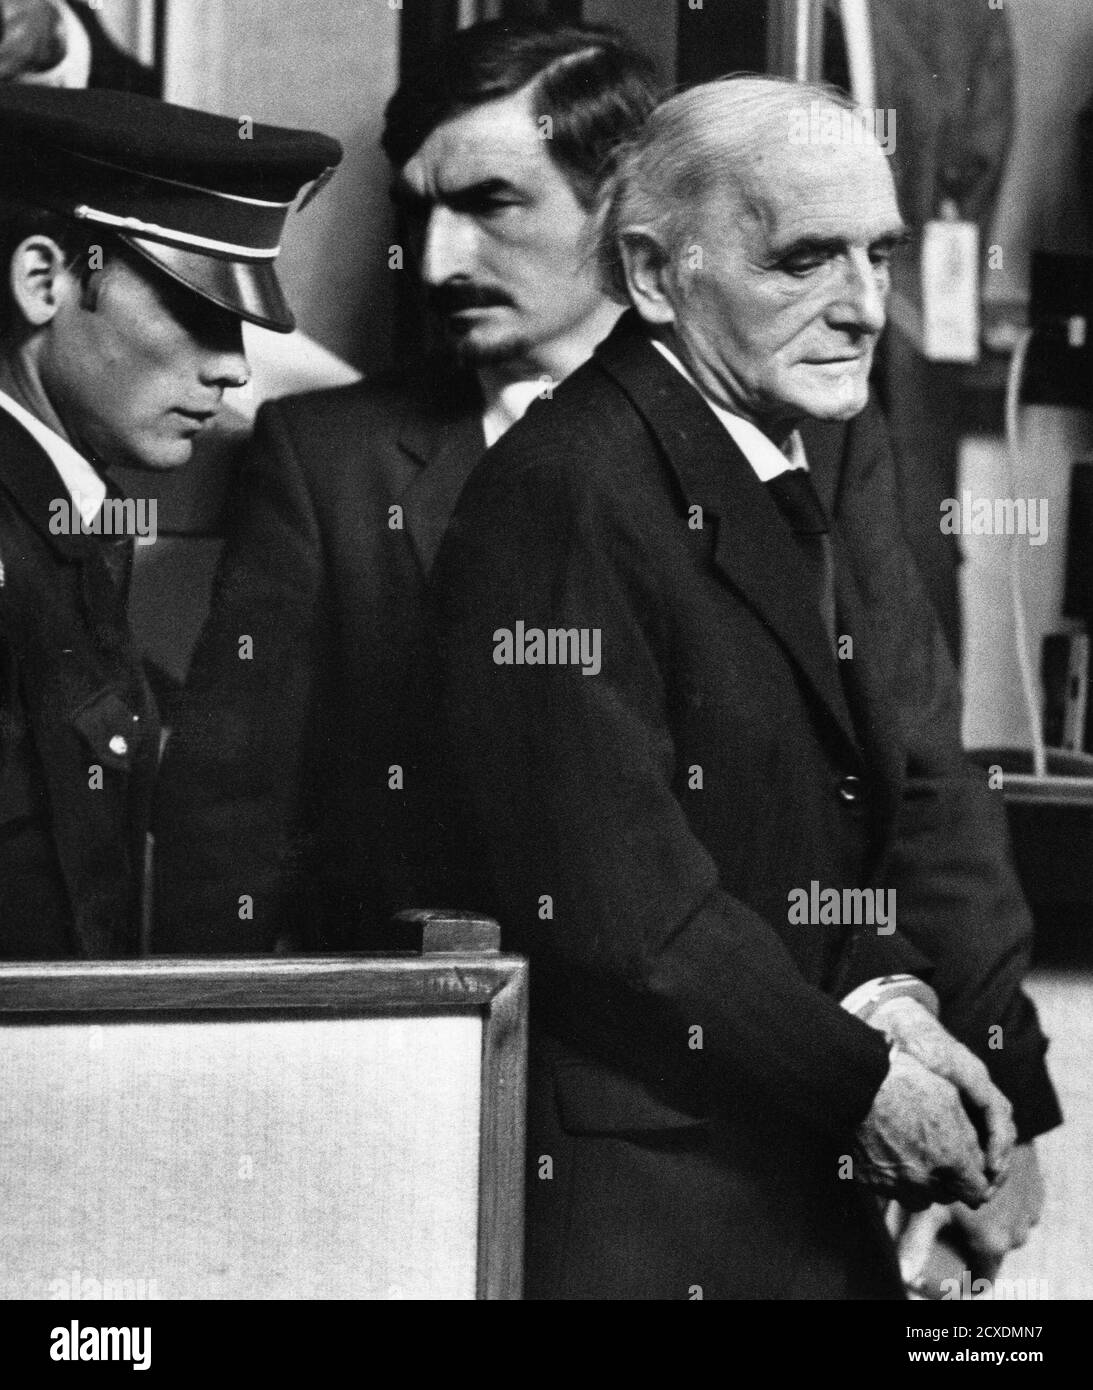 Former Nazi officer Klaus Barbie arrives handcuffed at the Lyon courthouse  May 11, 1987. Barbie was convicted of crimes against humanity and jailed  for life for his actions during World War two.